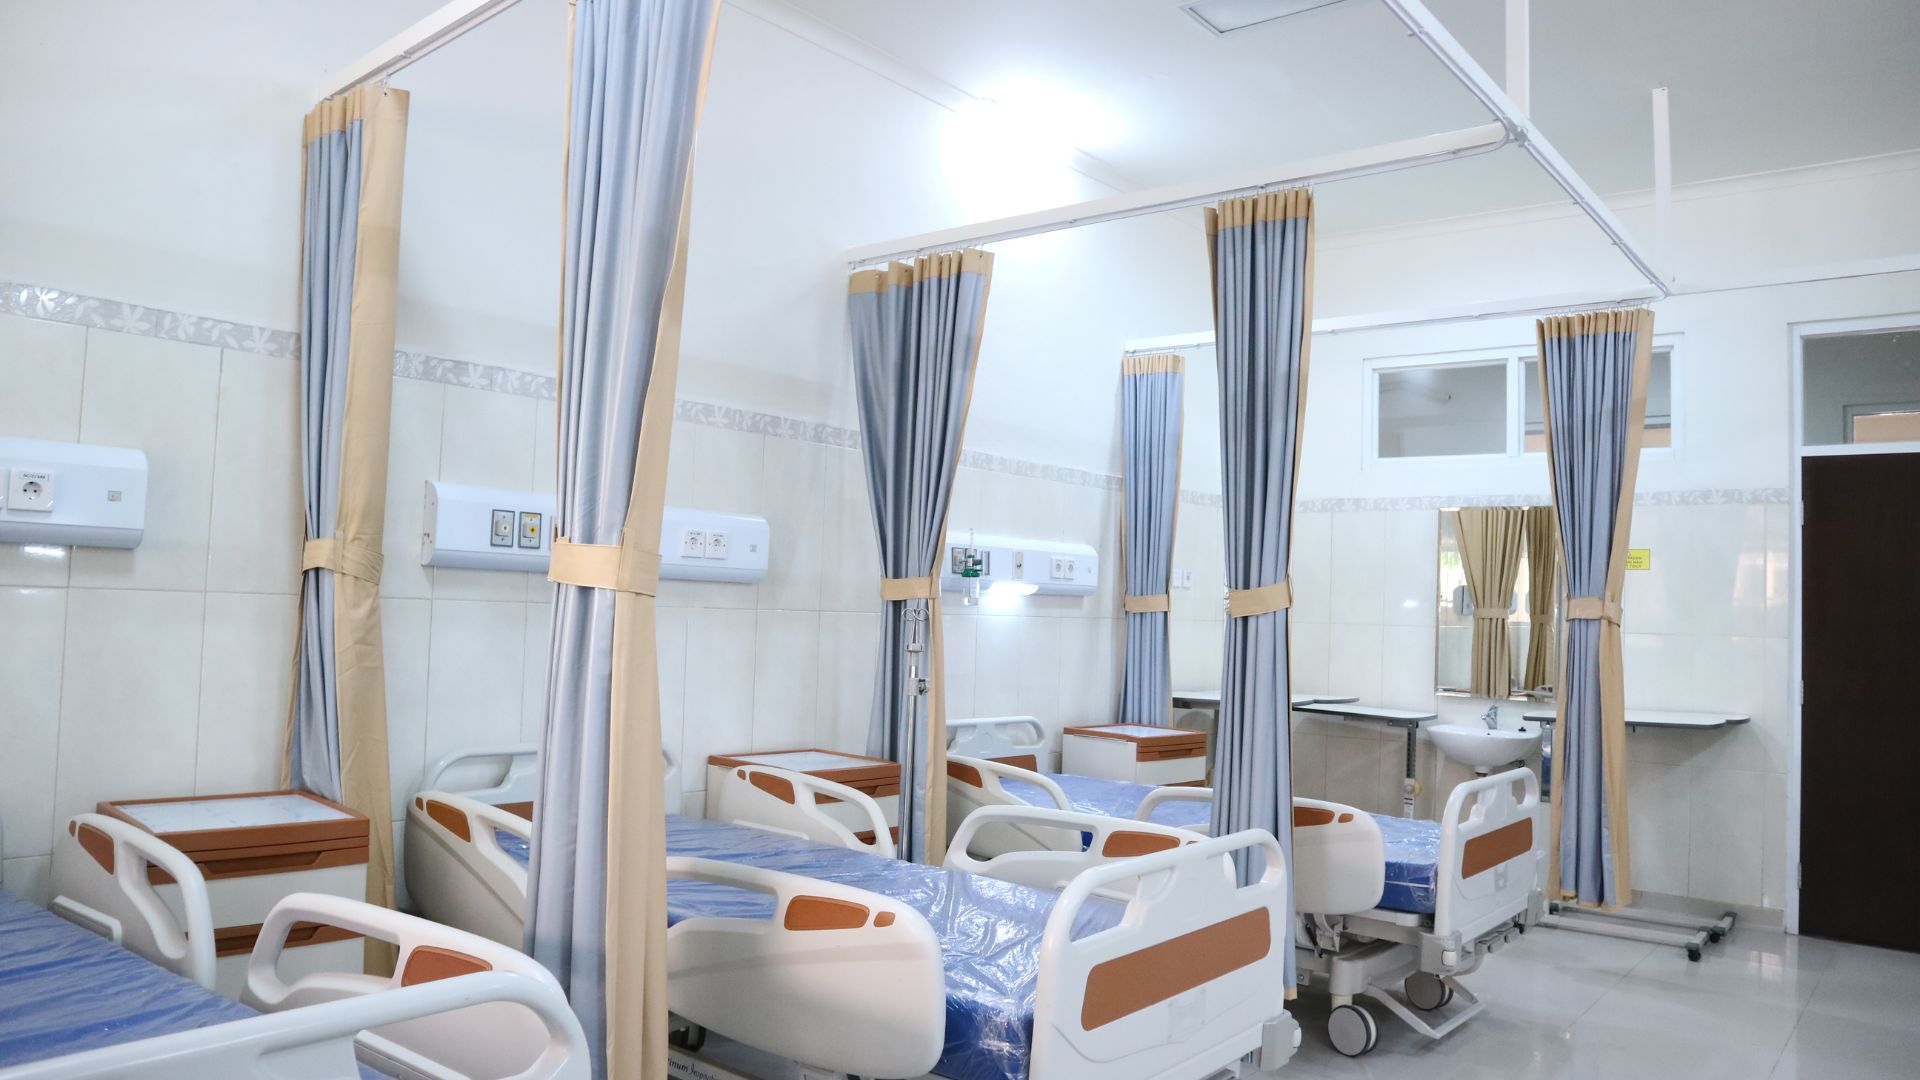 Israeli Hospitals Boost Emergency Readiness Amid National Security Concerns